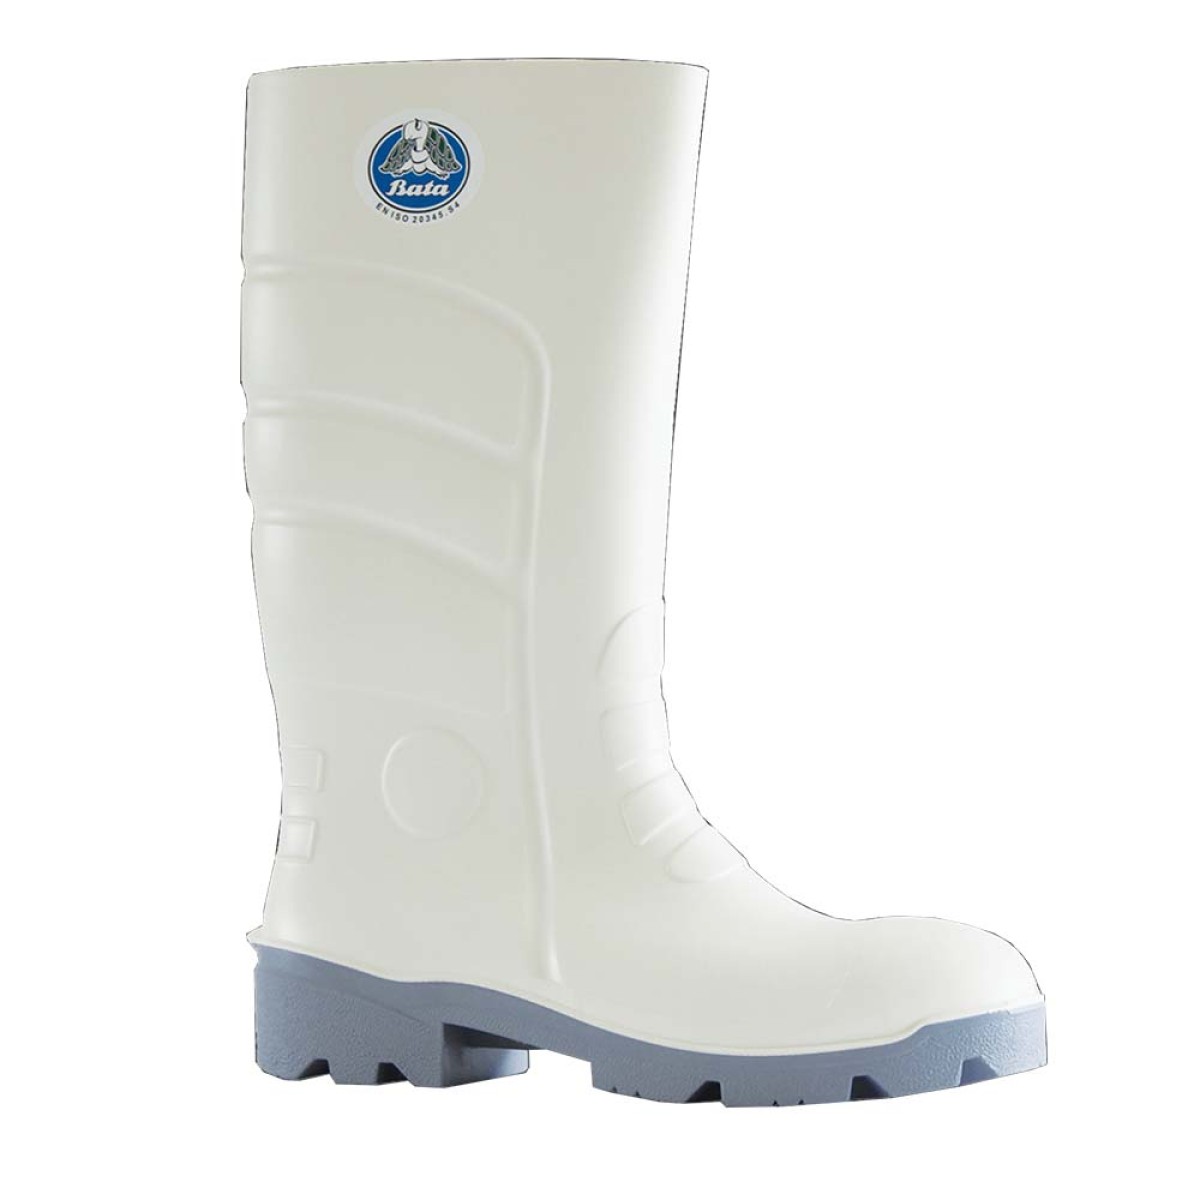 GUMBOOTS POLY WORKLITE BATA WHITE SIZE 9